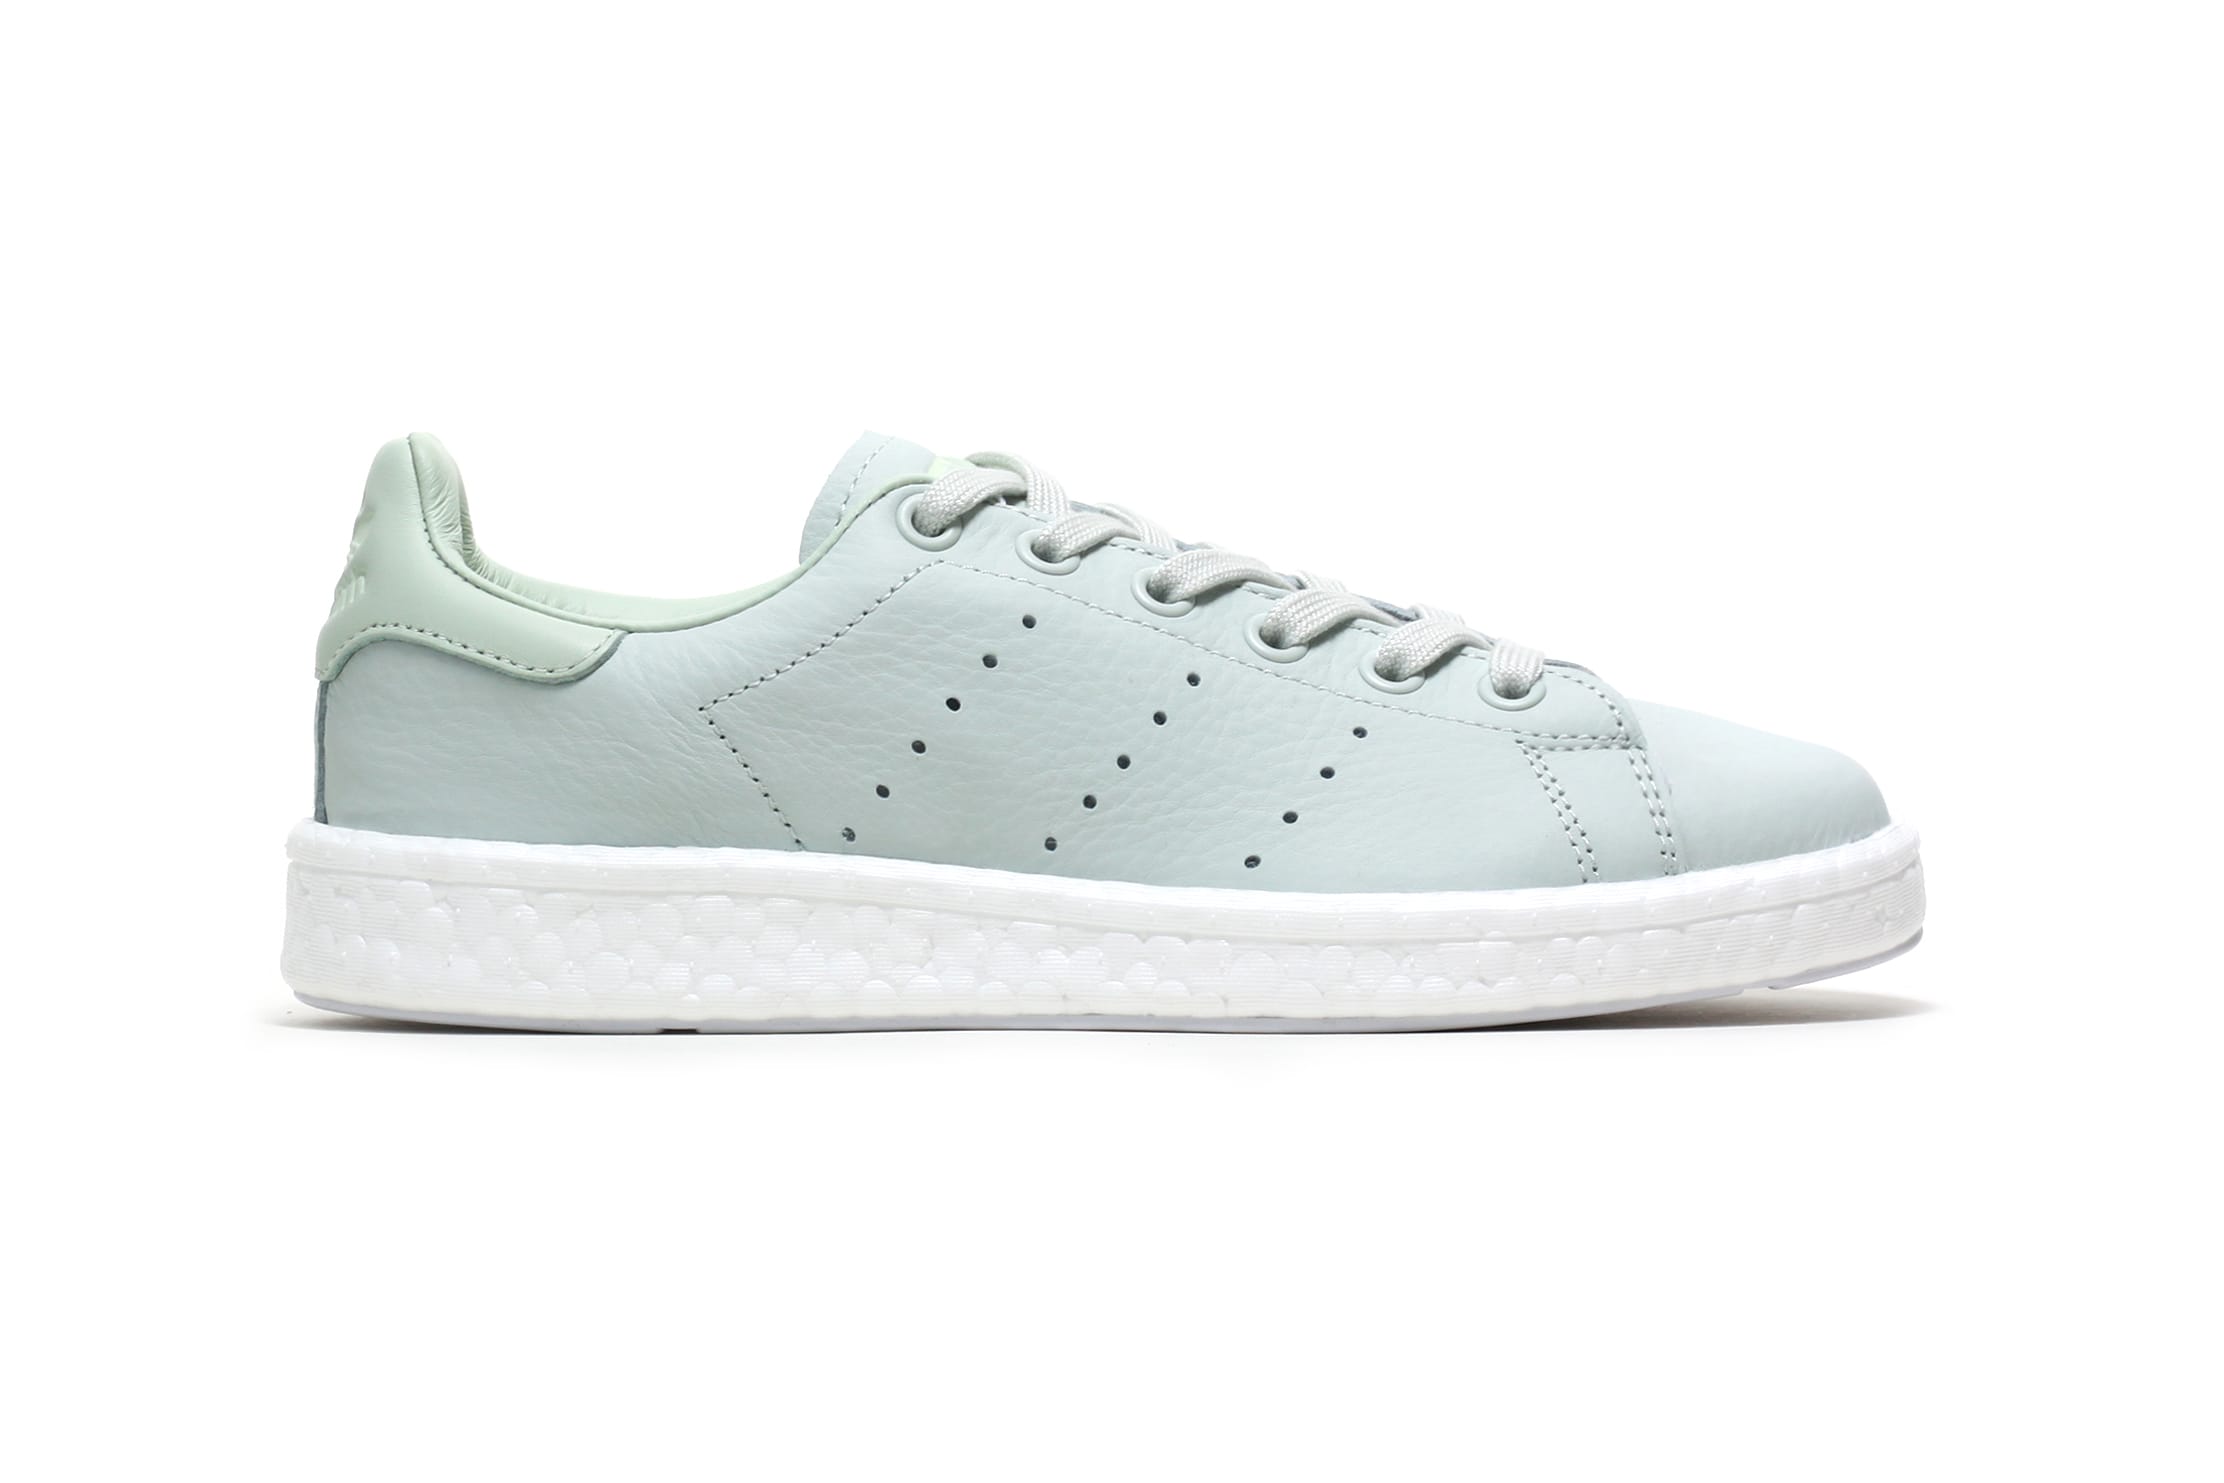 adidas Made a Stan Smith BOOST in Pastel Green | HYPEBAE حاجز مكيف سبليت